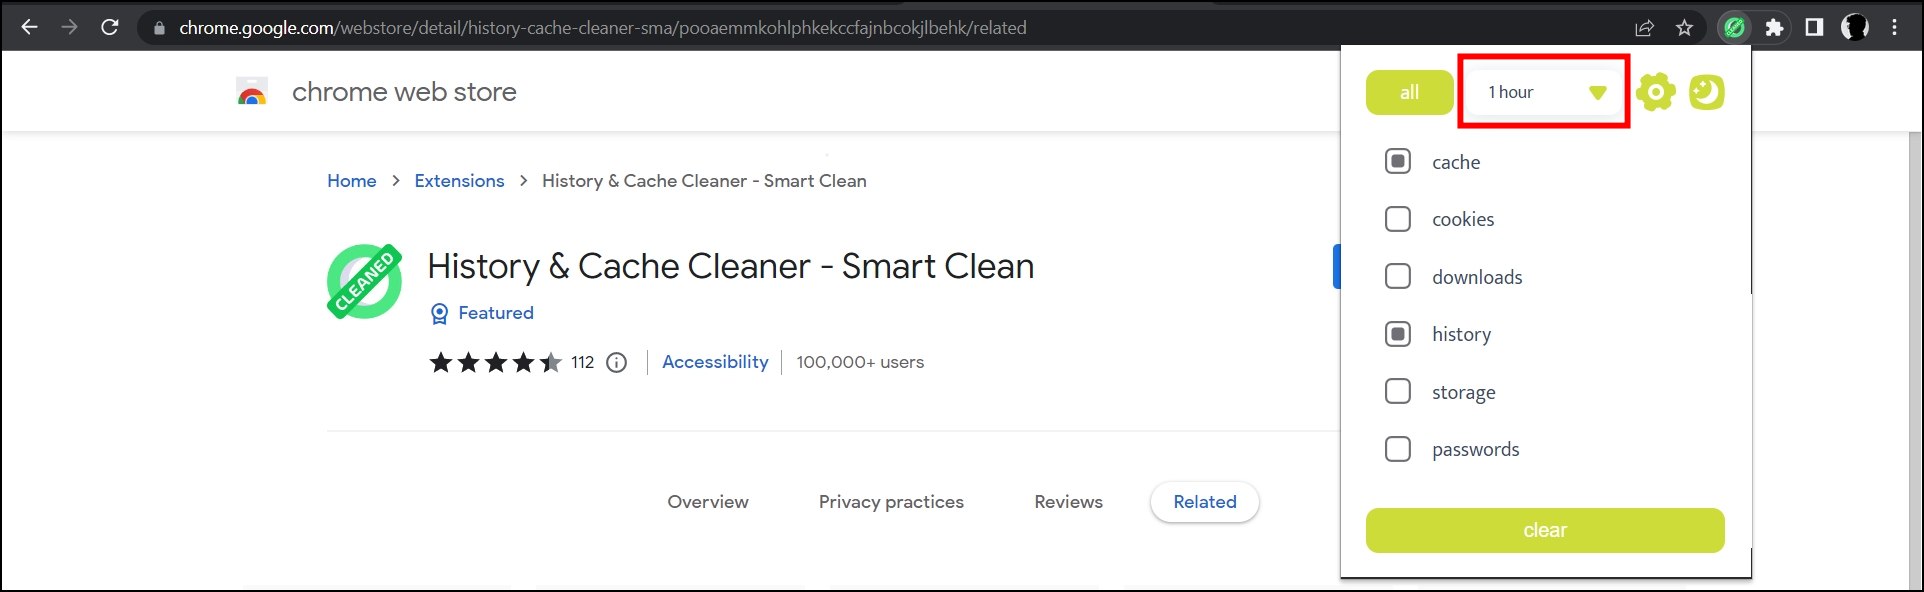 History & Cache Cleaner - Smart Clean Extension